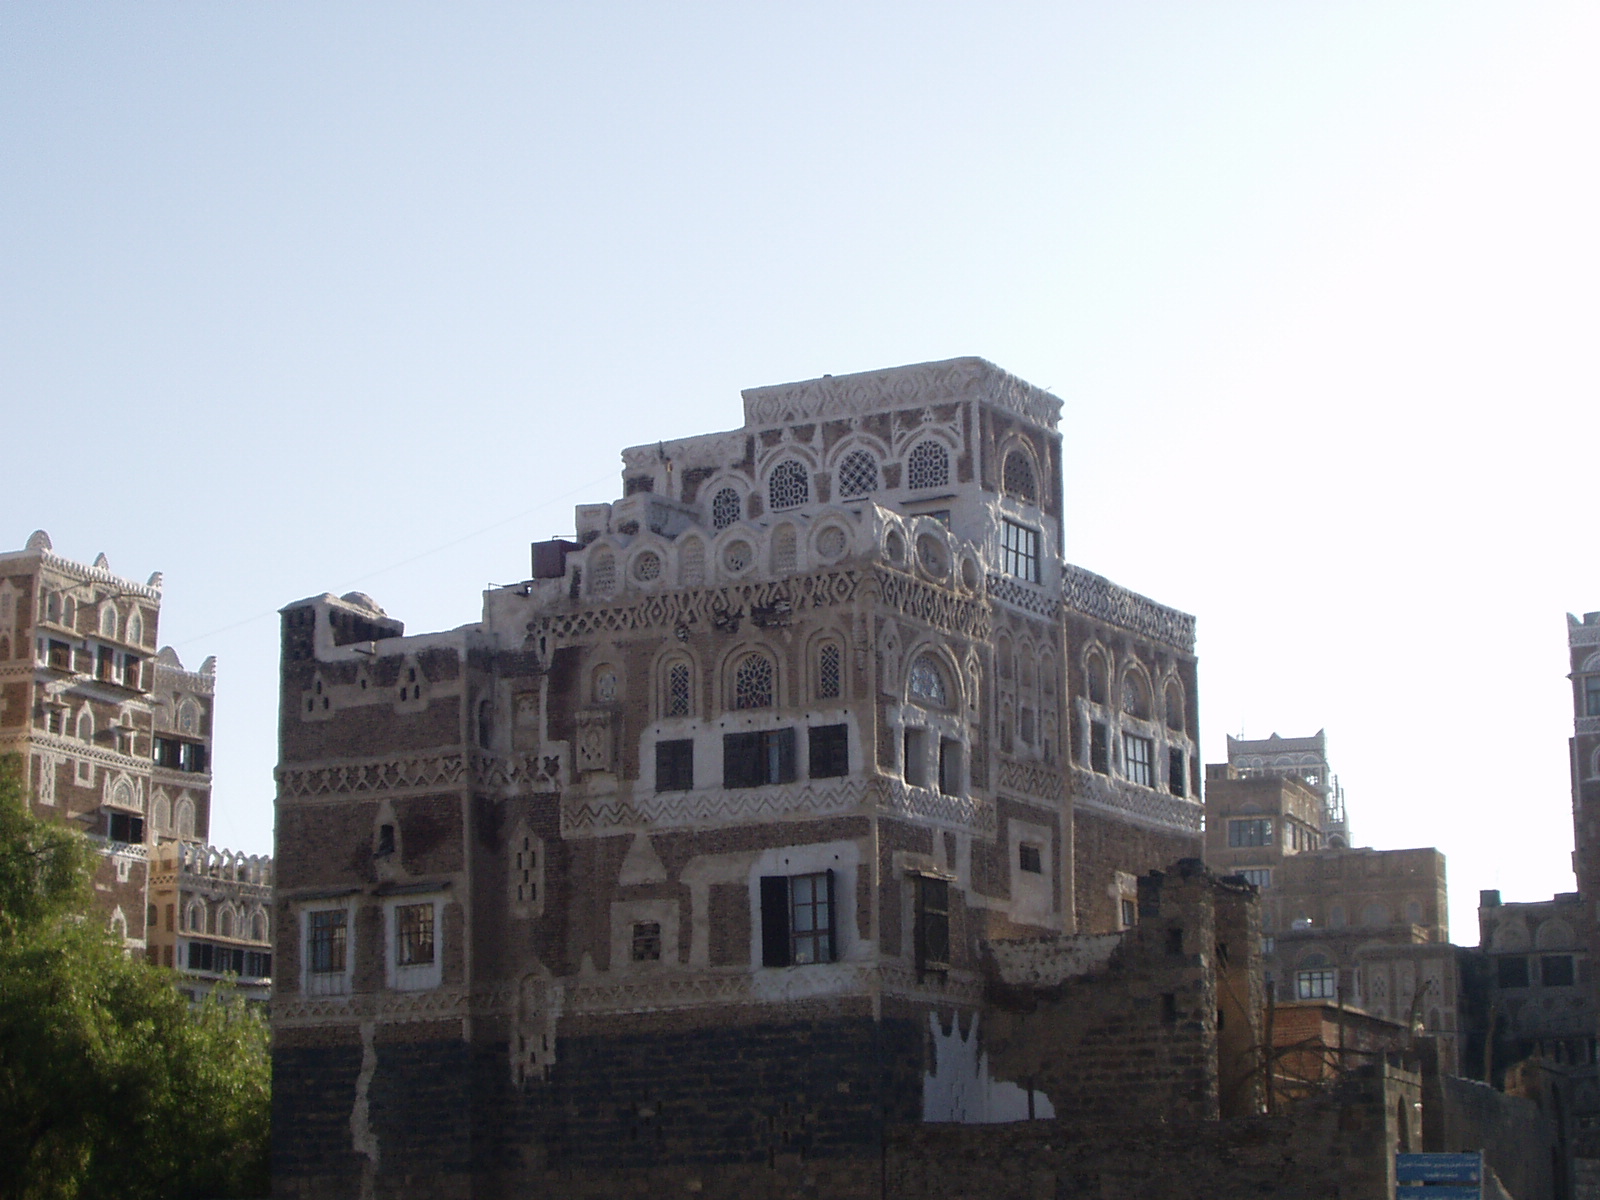 The indescribable beauty of old Sanaa